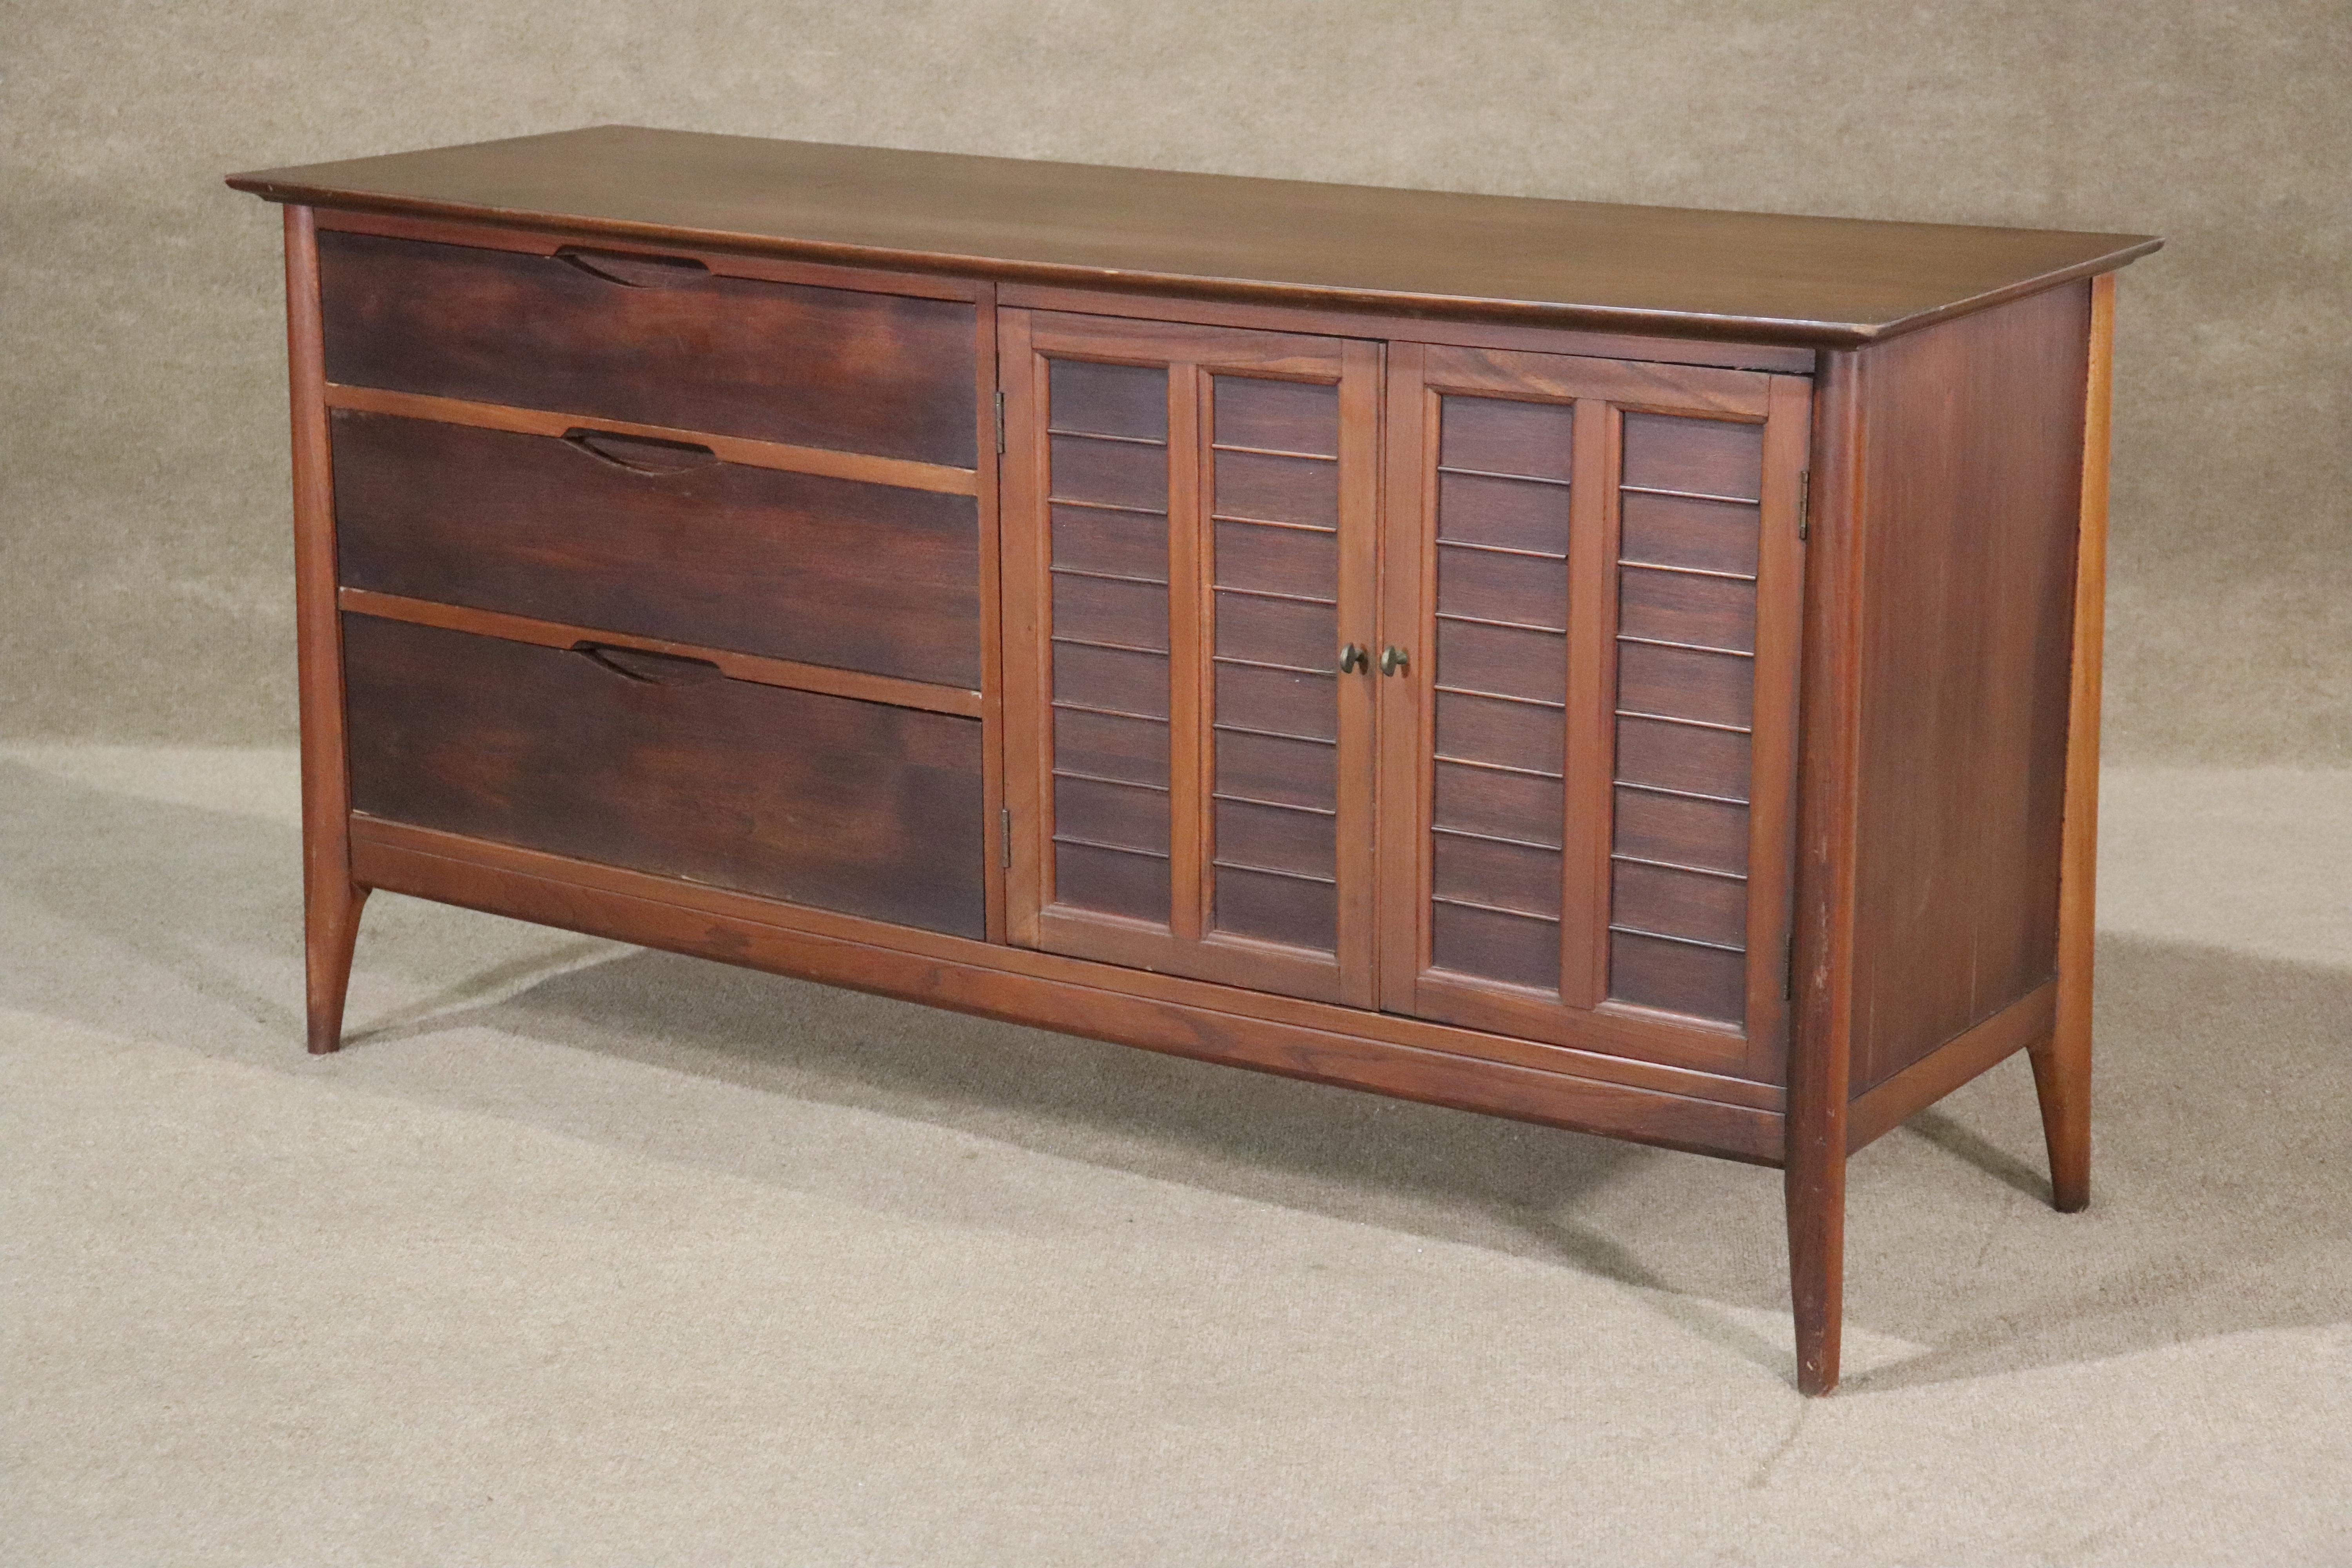 Vintage Danish made buffet or small credenza with drawers and cabinet storage.
Please confirm location NY or NJ